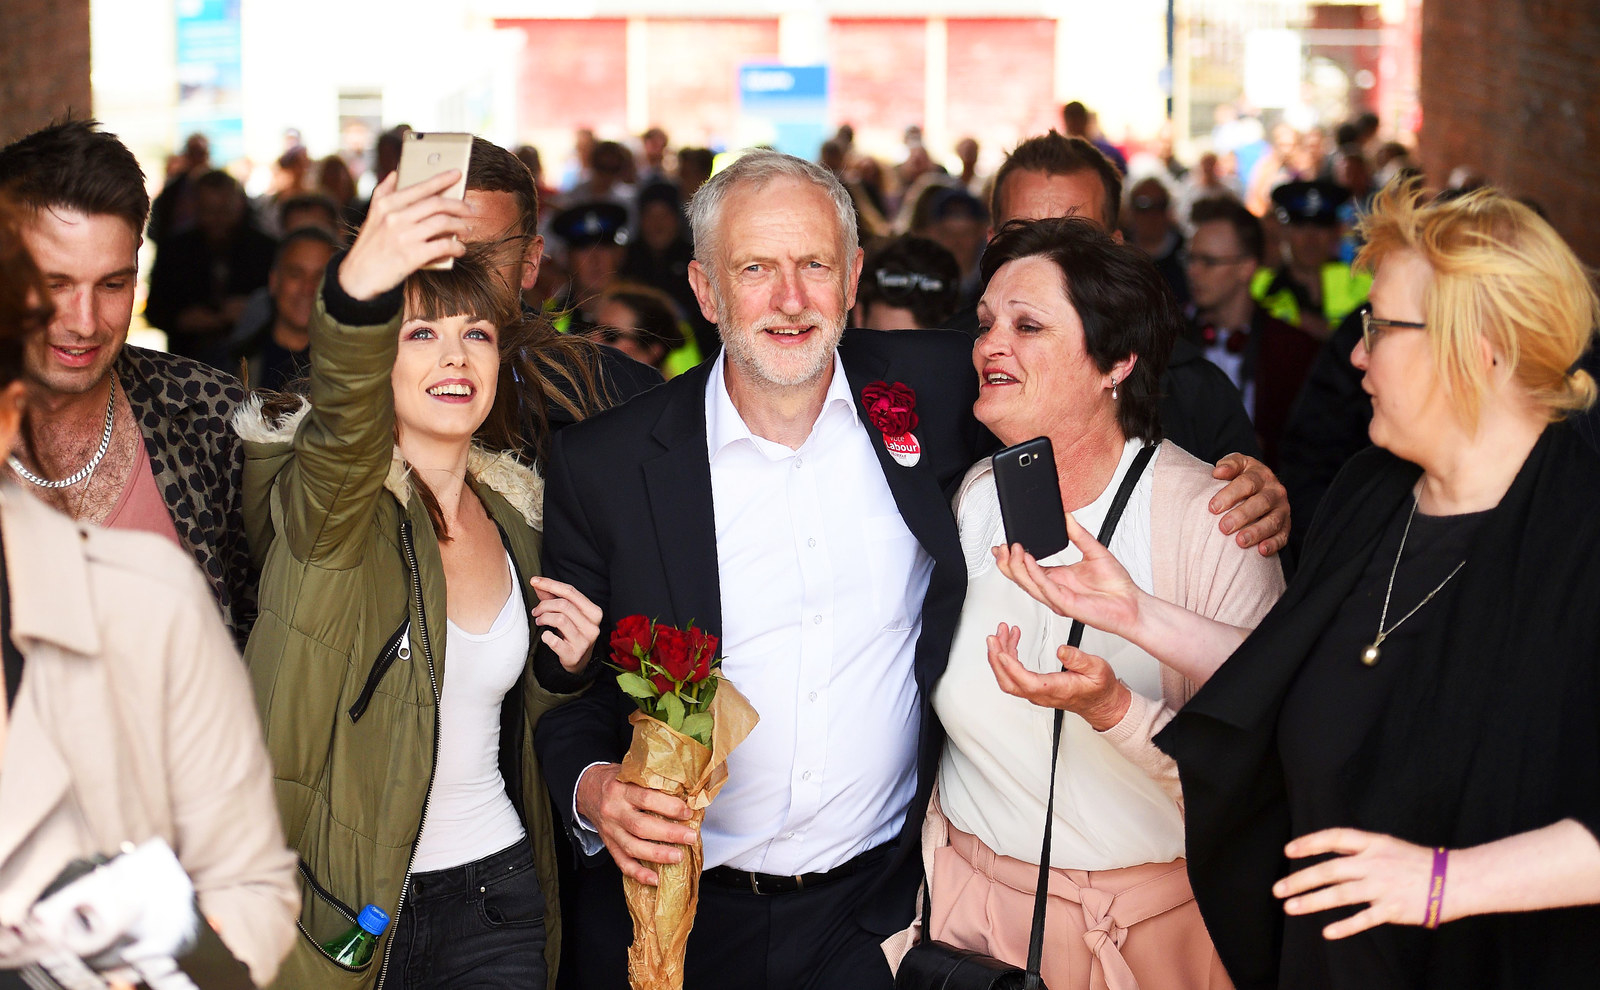 In Pictures: The Last Day Of General Election Campaigning